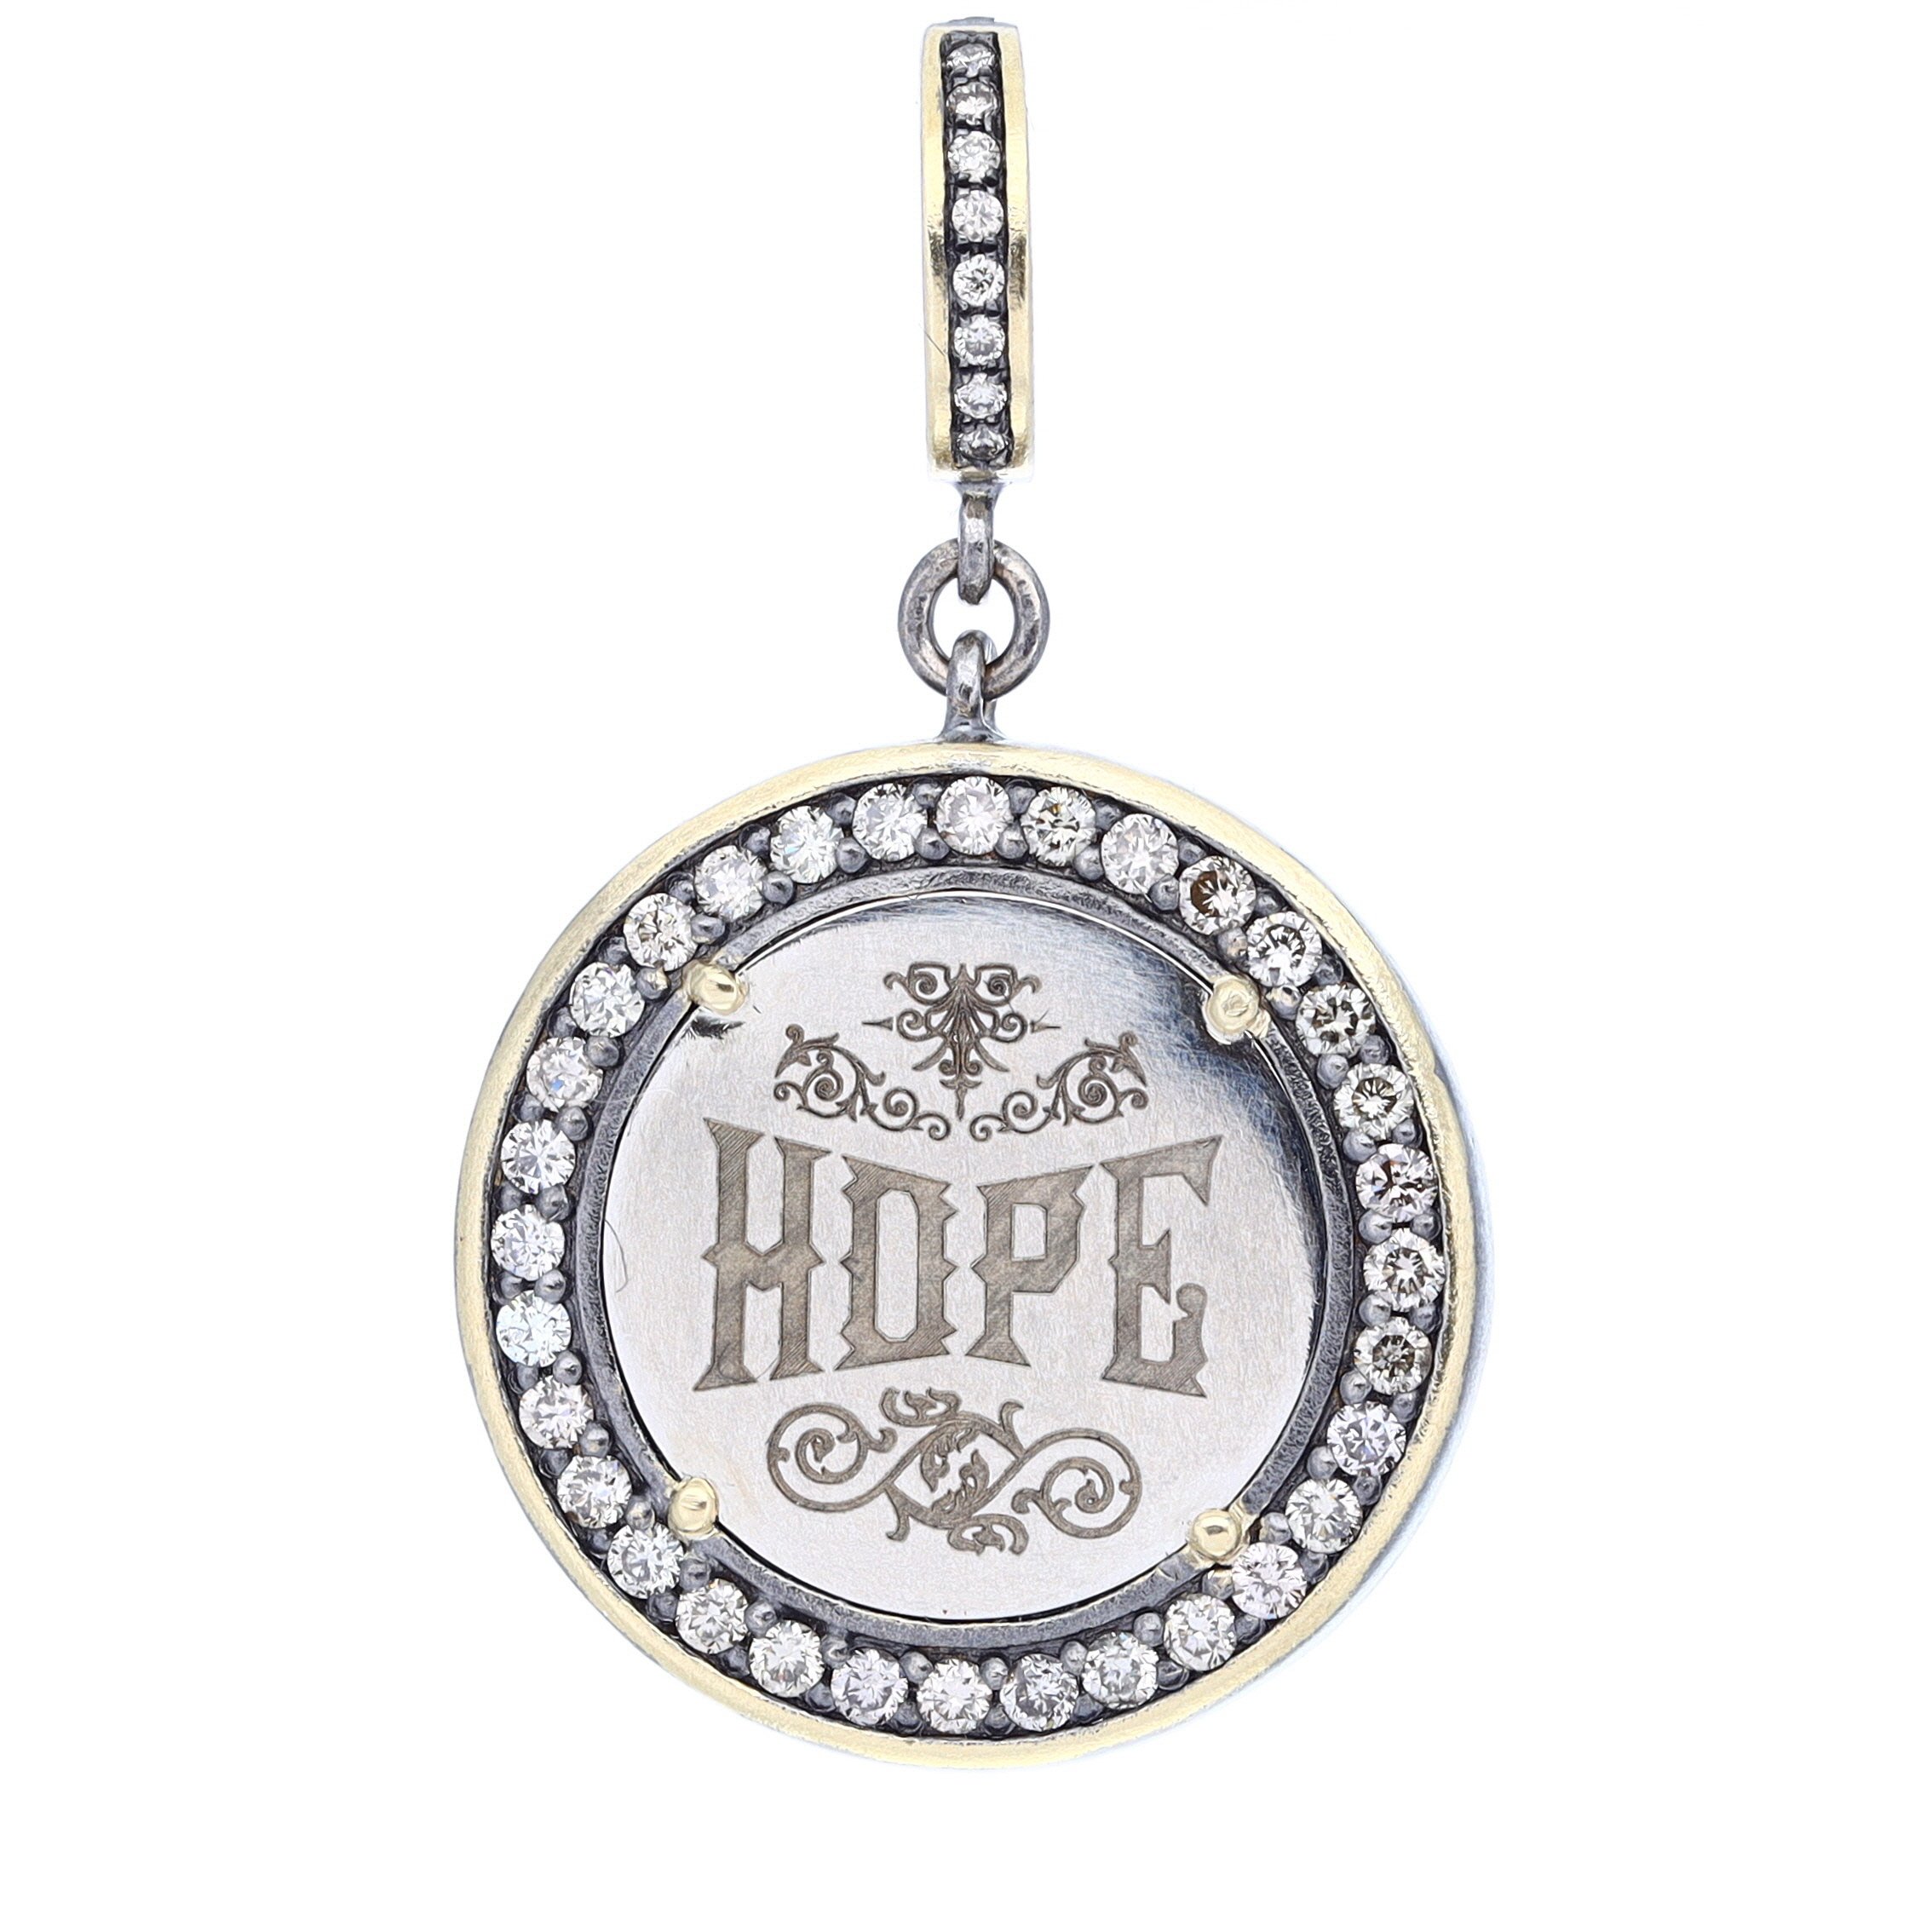 Love Token Engraved with "Hope"